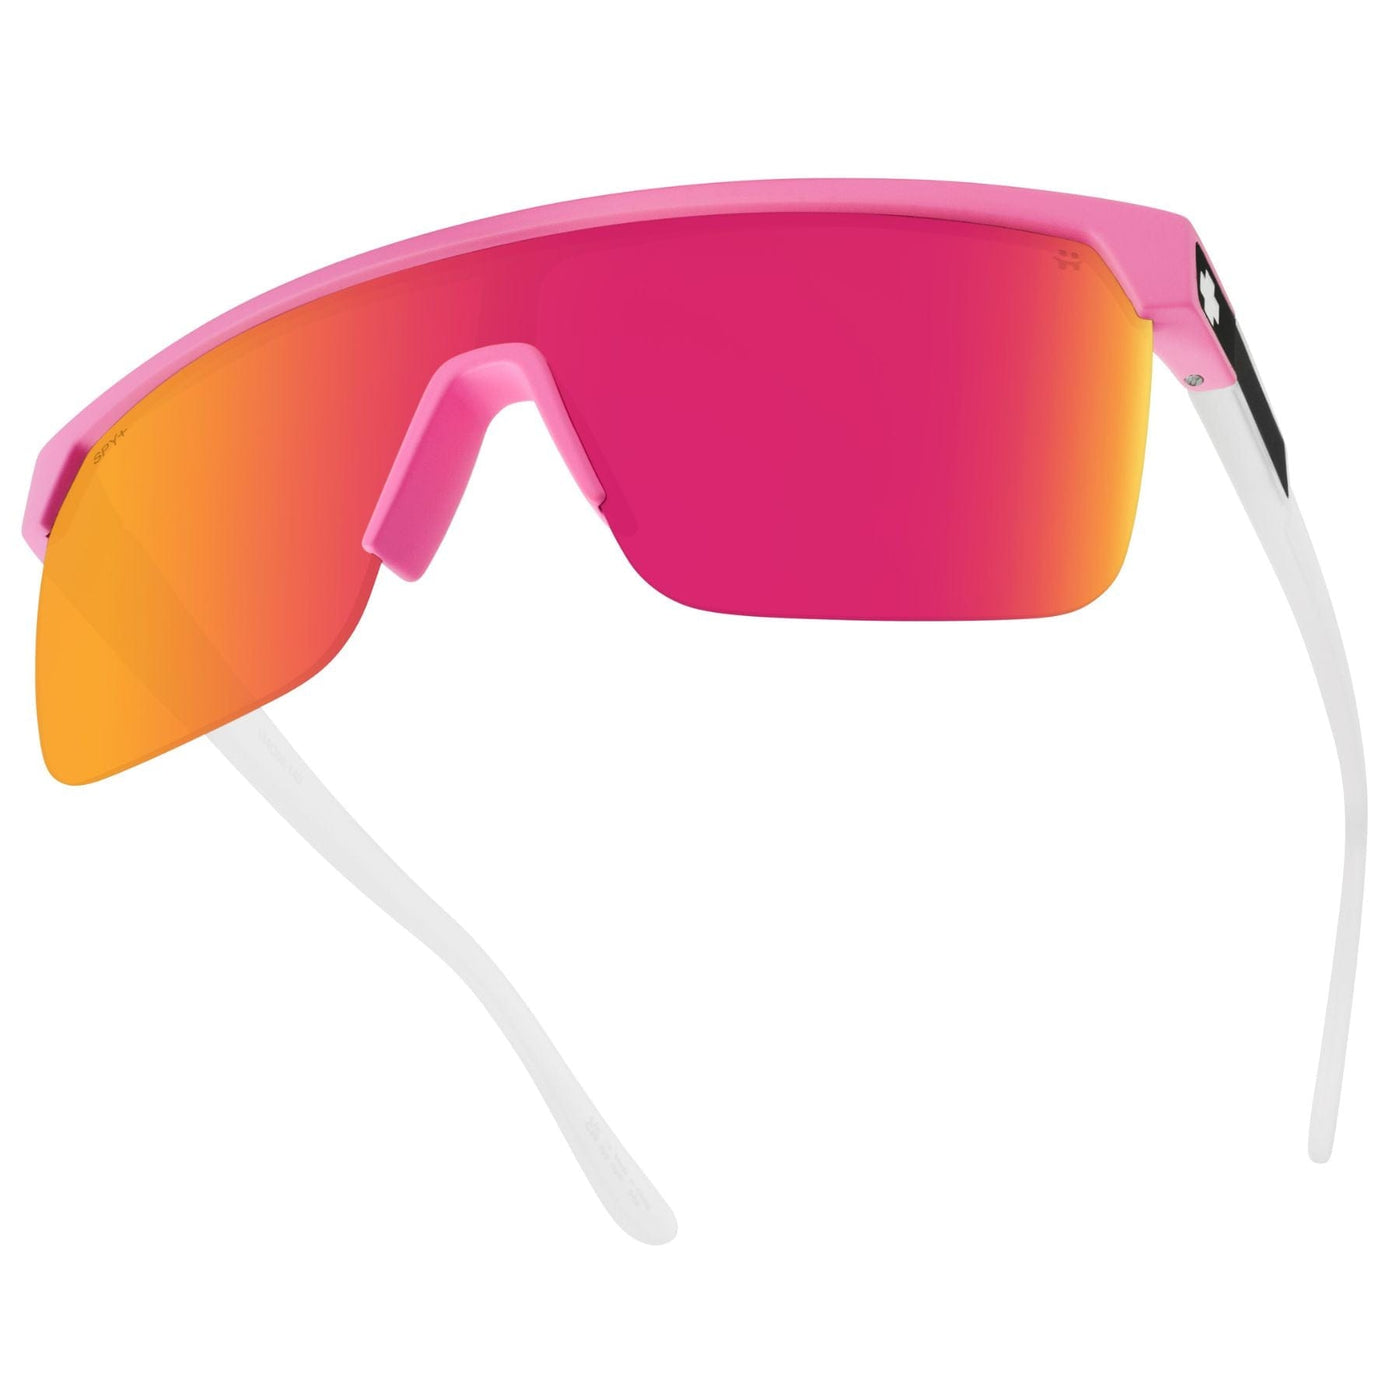 SPY FLYNN 5050 Sunglasses, Happy Lens - Pink 8Lines Shop - Fast Shipping